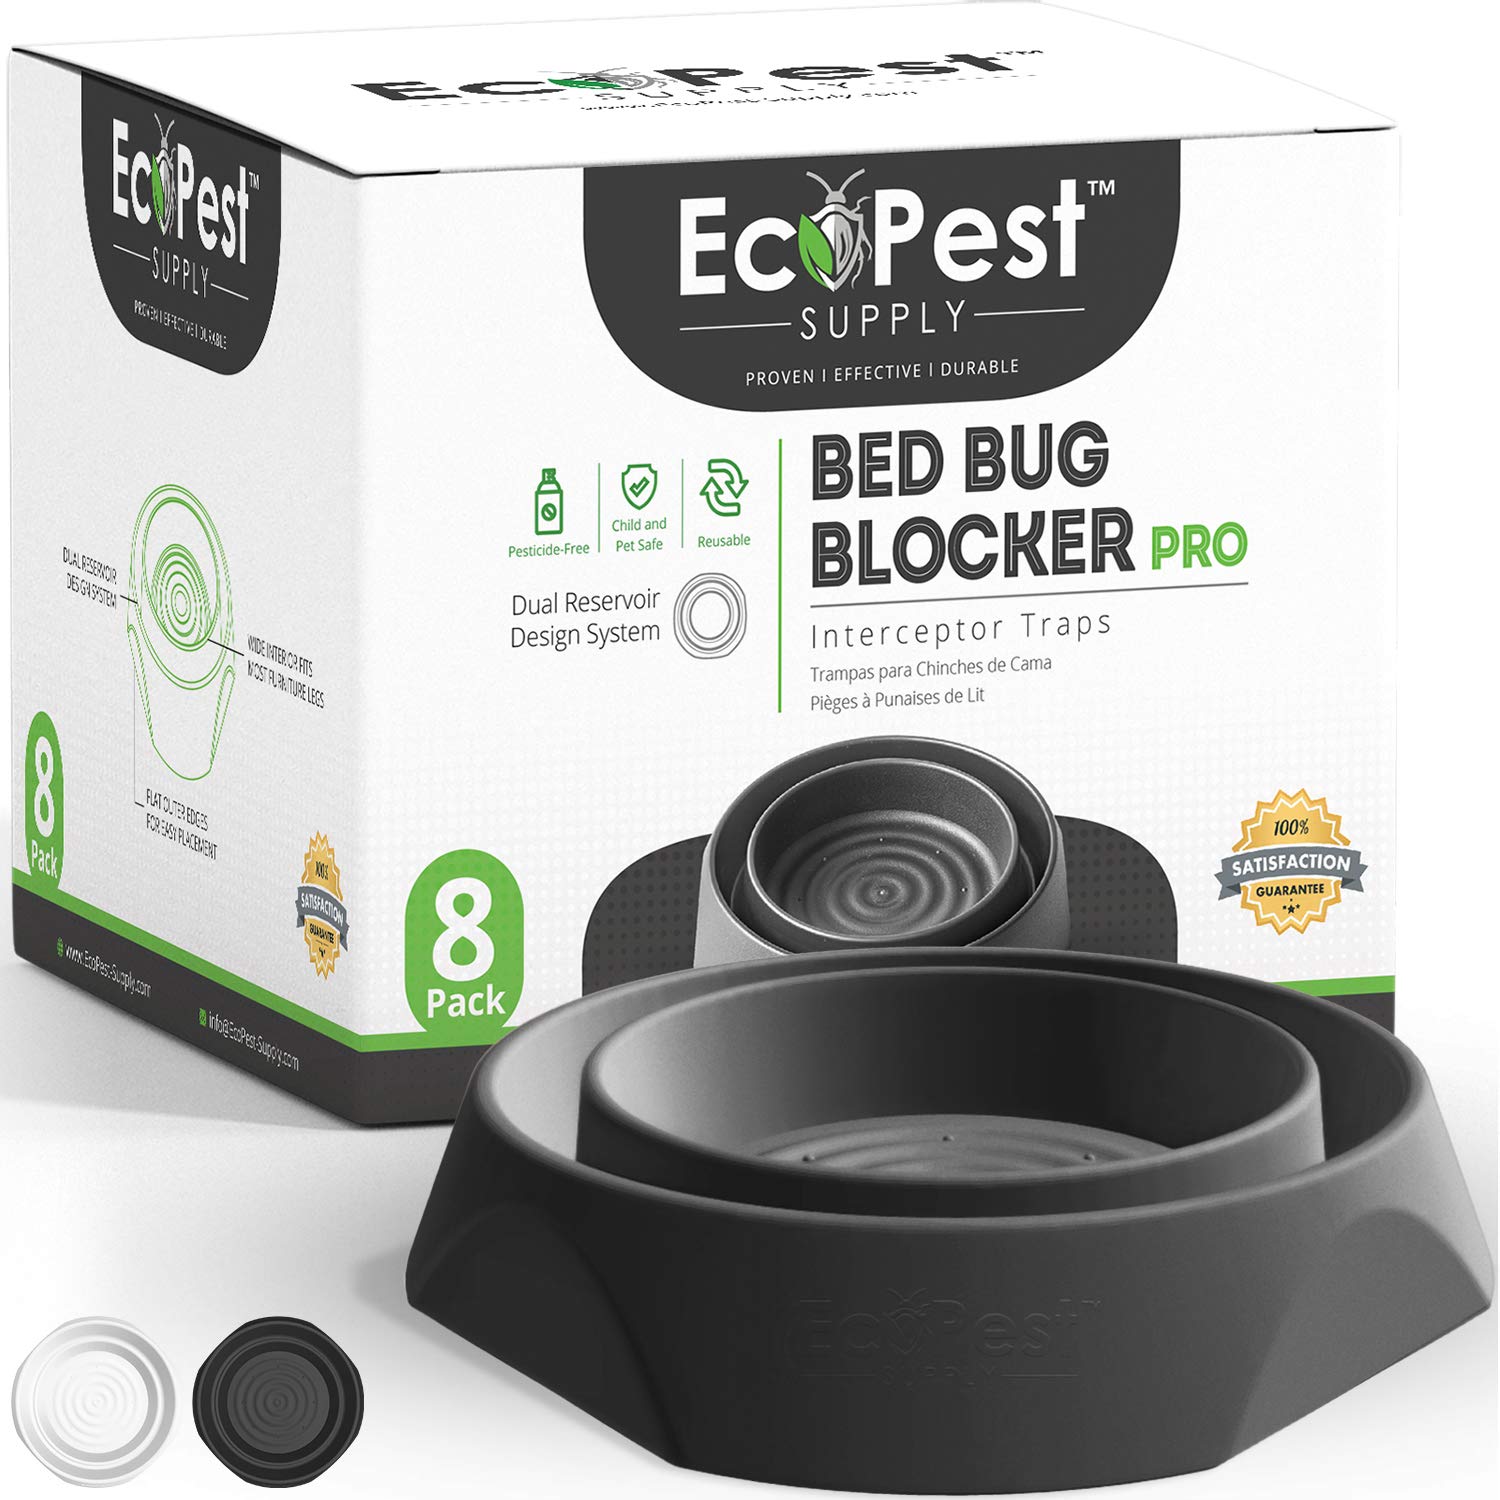 Book Cover Bed Bug Interceptors – 8 Pack | Bed Bug Blocker (Pro) Interceptor Traps (Black) | Insect Trap, Monitor, and Detector for Bed Legs